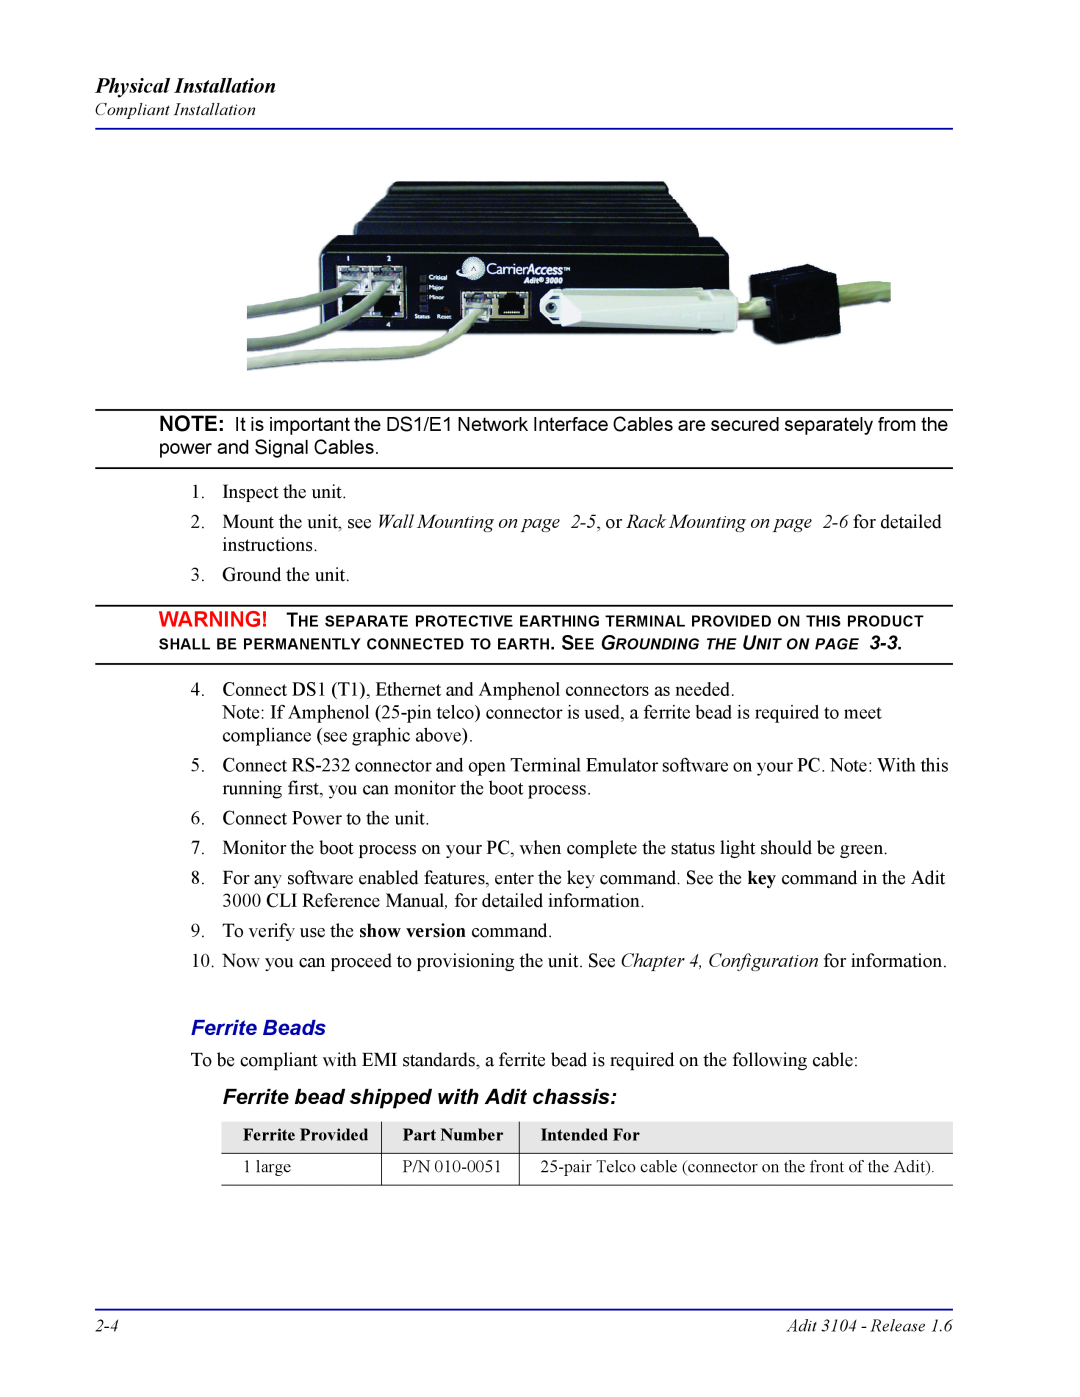 Carrier Access Adit 3104 user manual Ferrite Beads, Physical Installation, Ferrite bead shipped with Adit chassis 